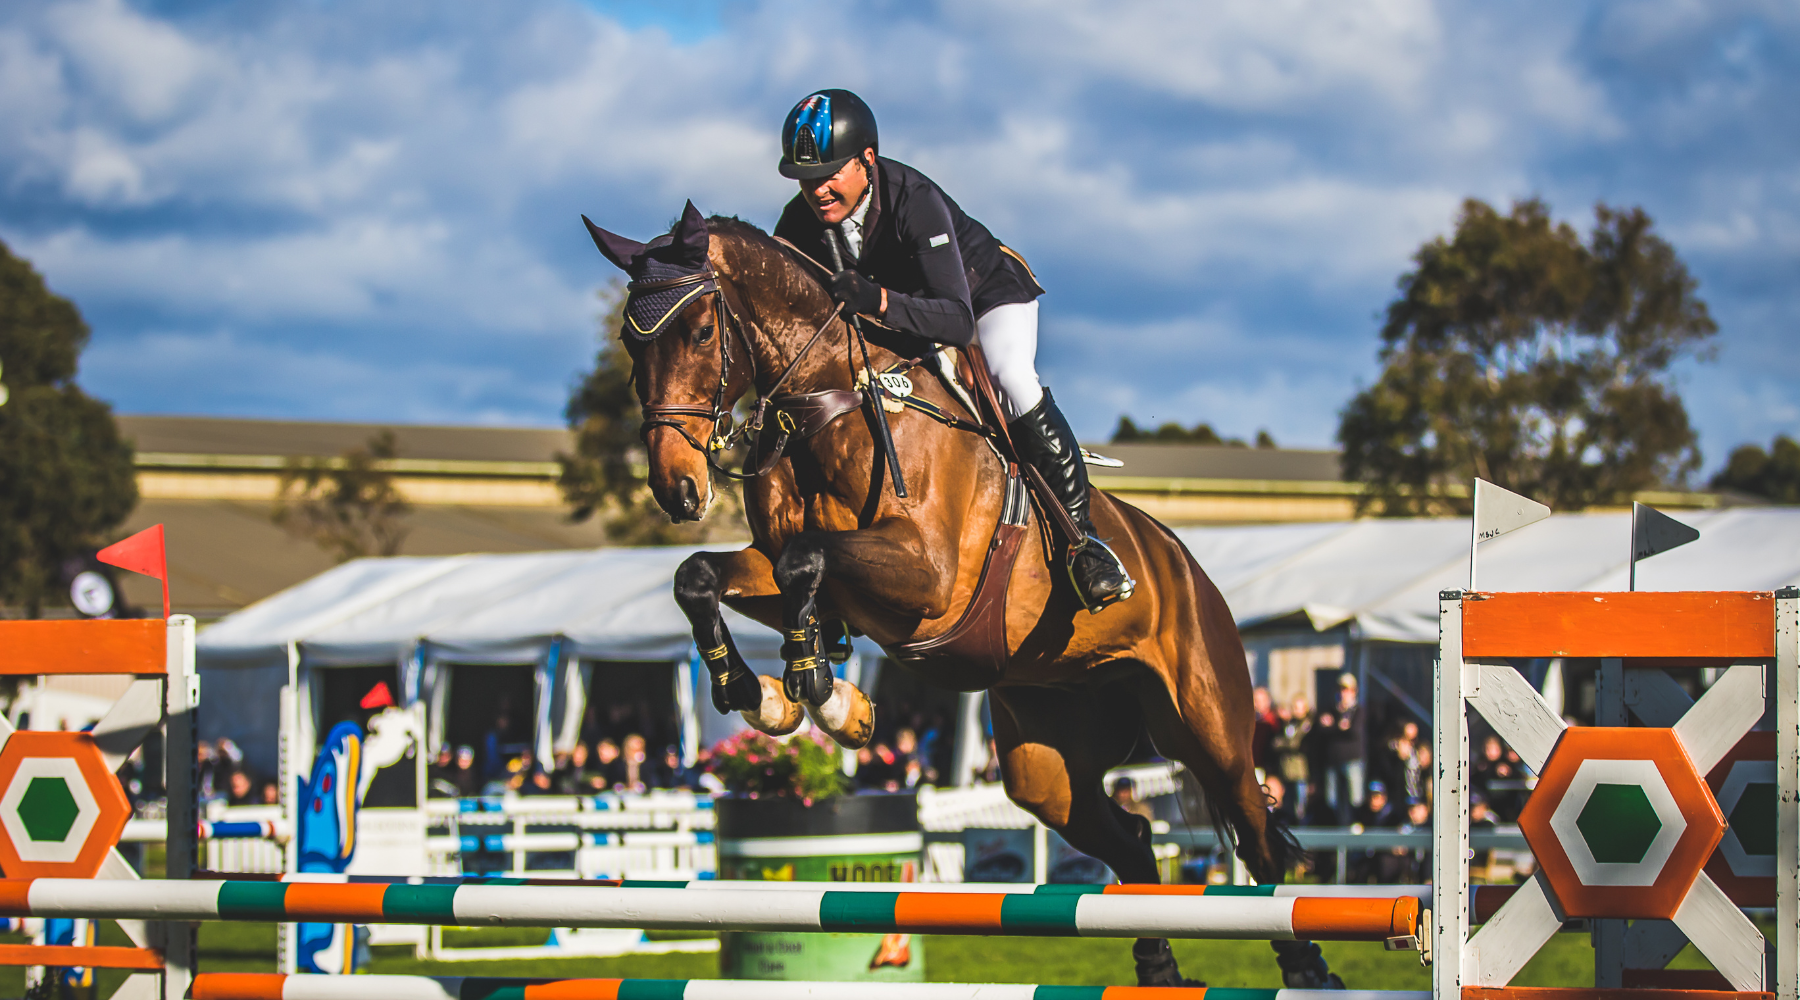 Tim Boland and his horse performing a jump, supplemented by Rose-Hip Vital Equine for optimal fitness.